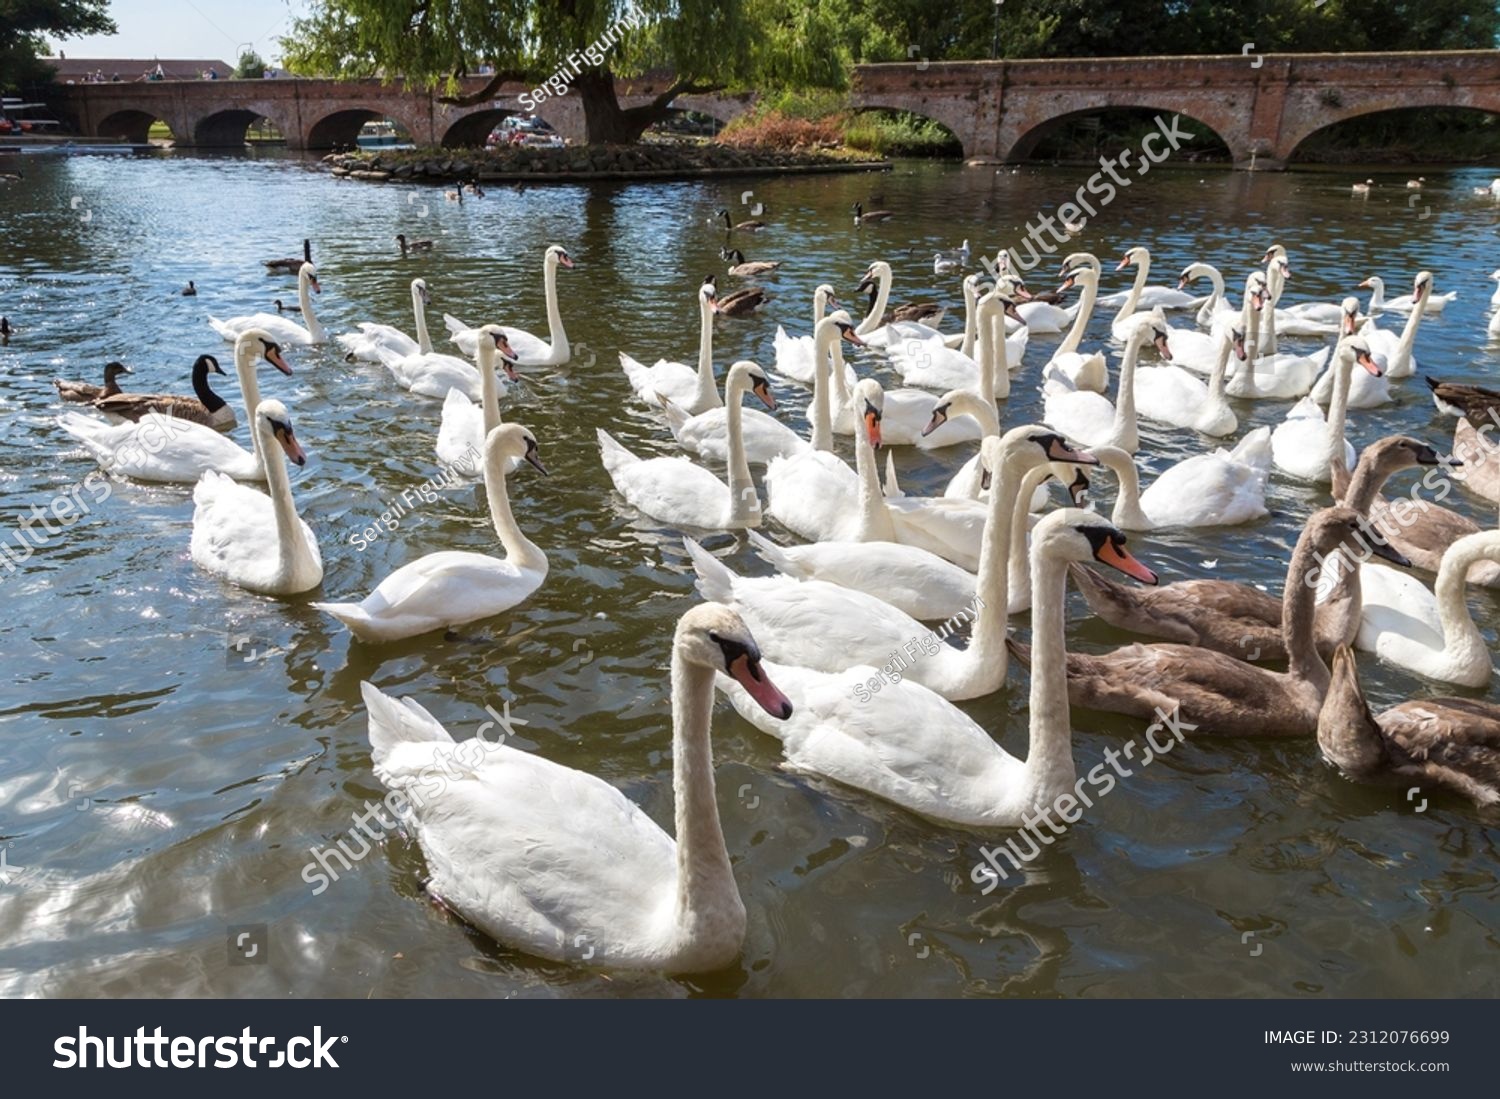 Swans in the river in Stratford-upon-Avon in a beautiful summer day, England, United Kingdom #2312076699